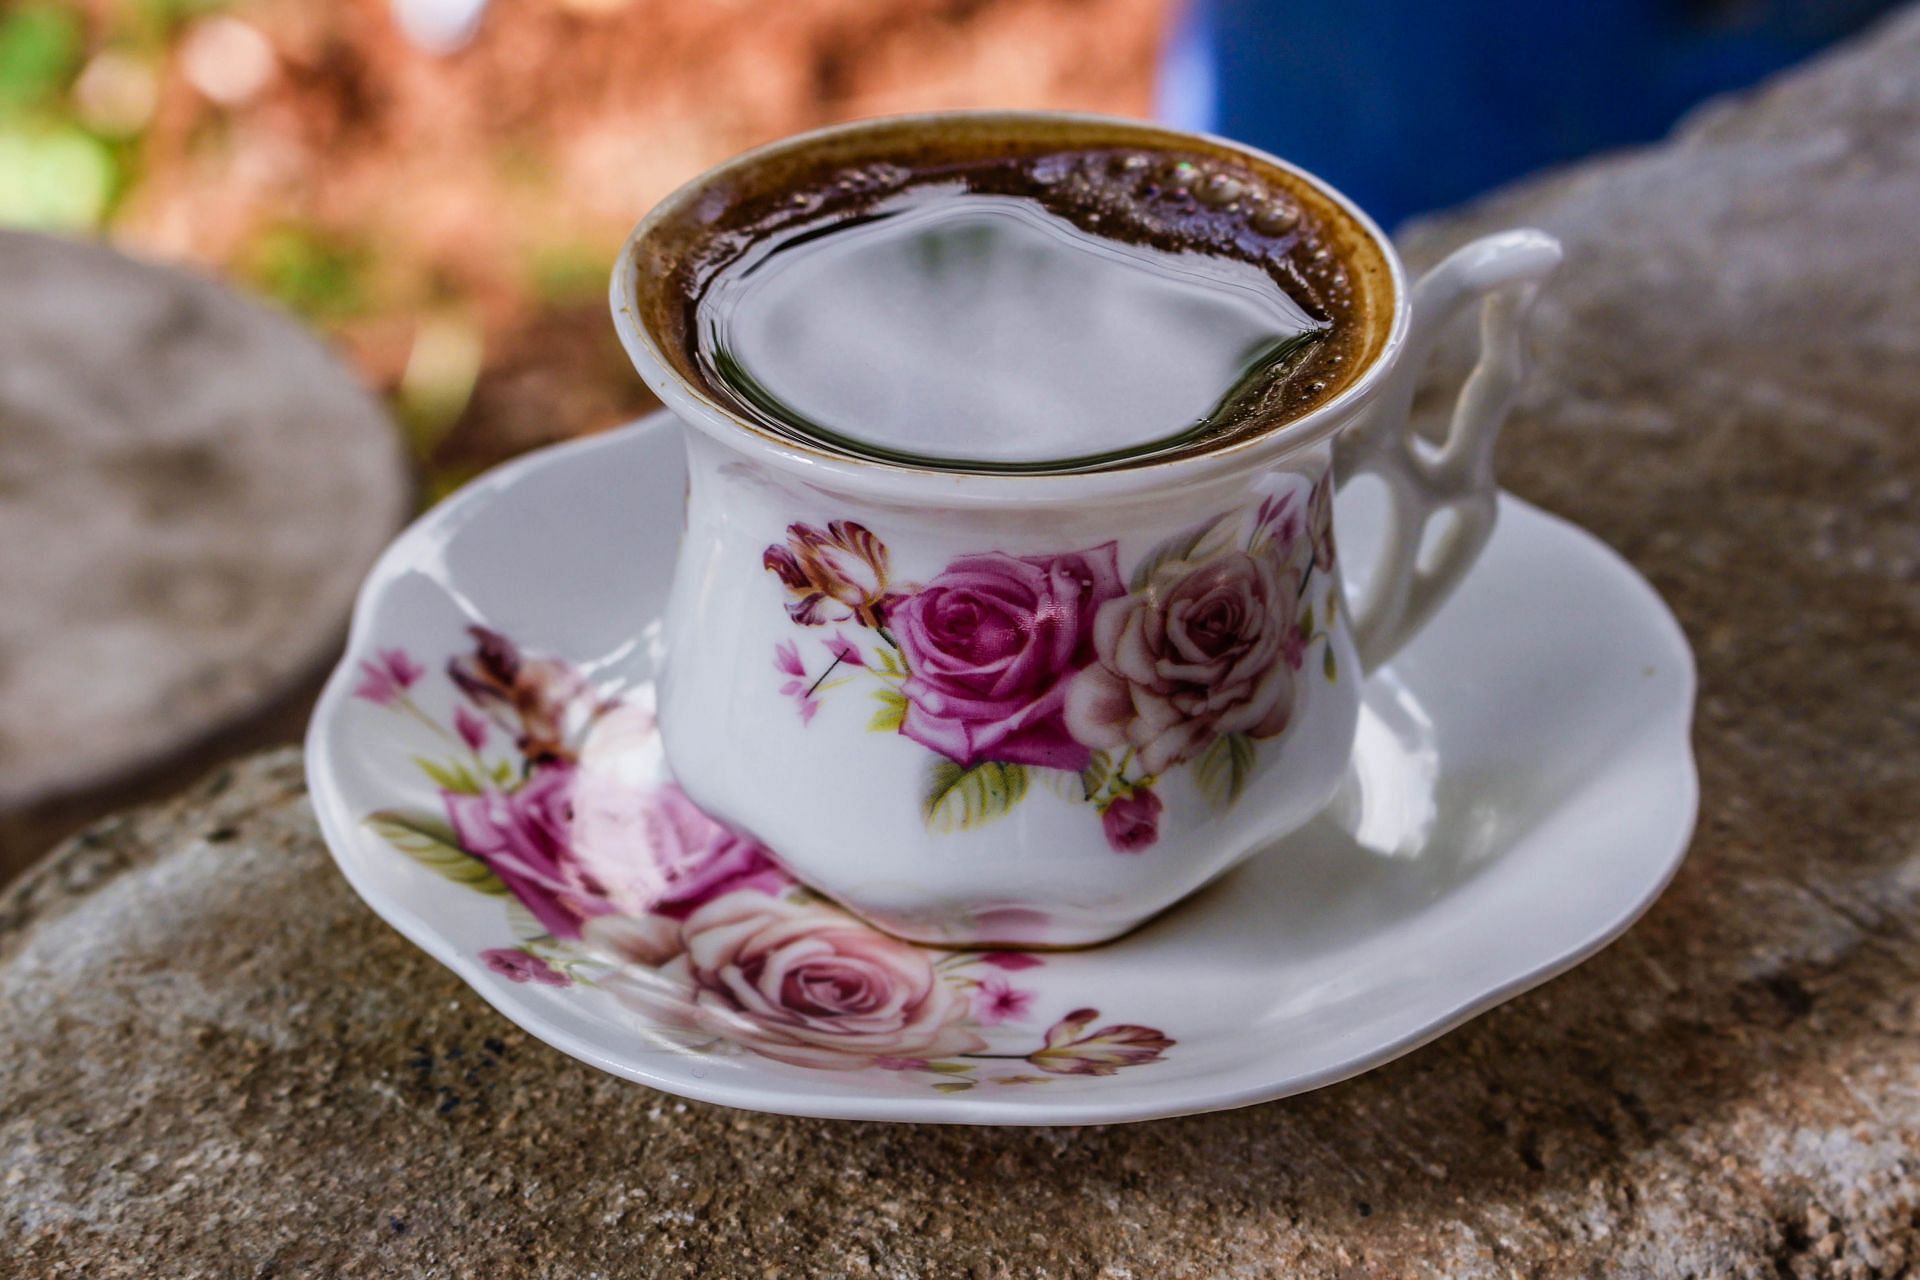 Rose tea as one of the stress-relief teas (image sourced via Pexels / Photo by Samer)